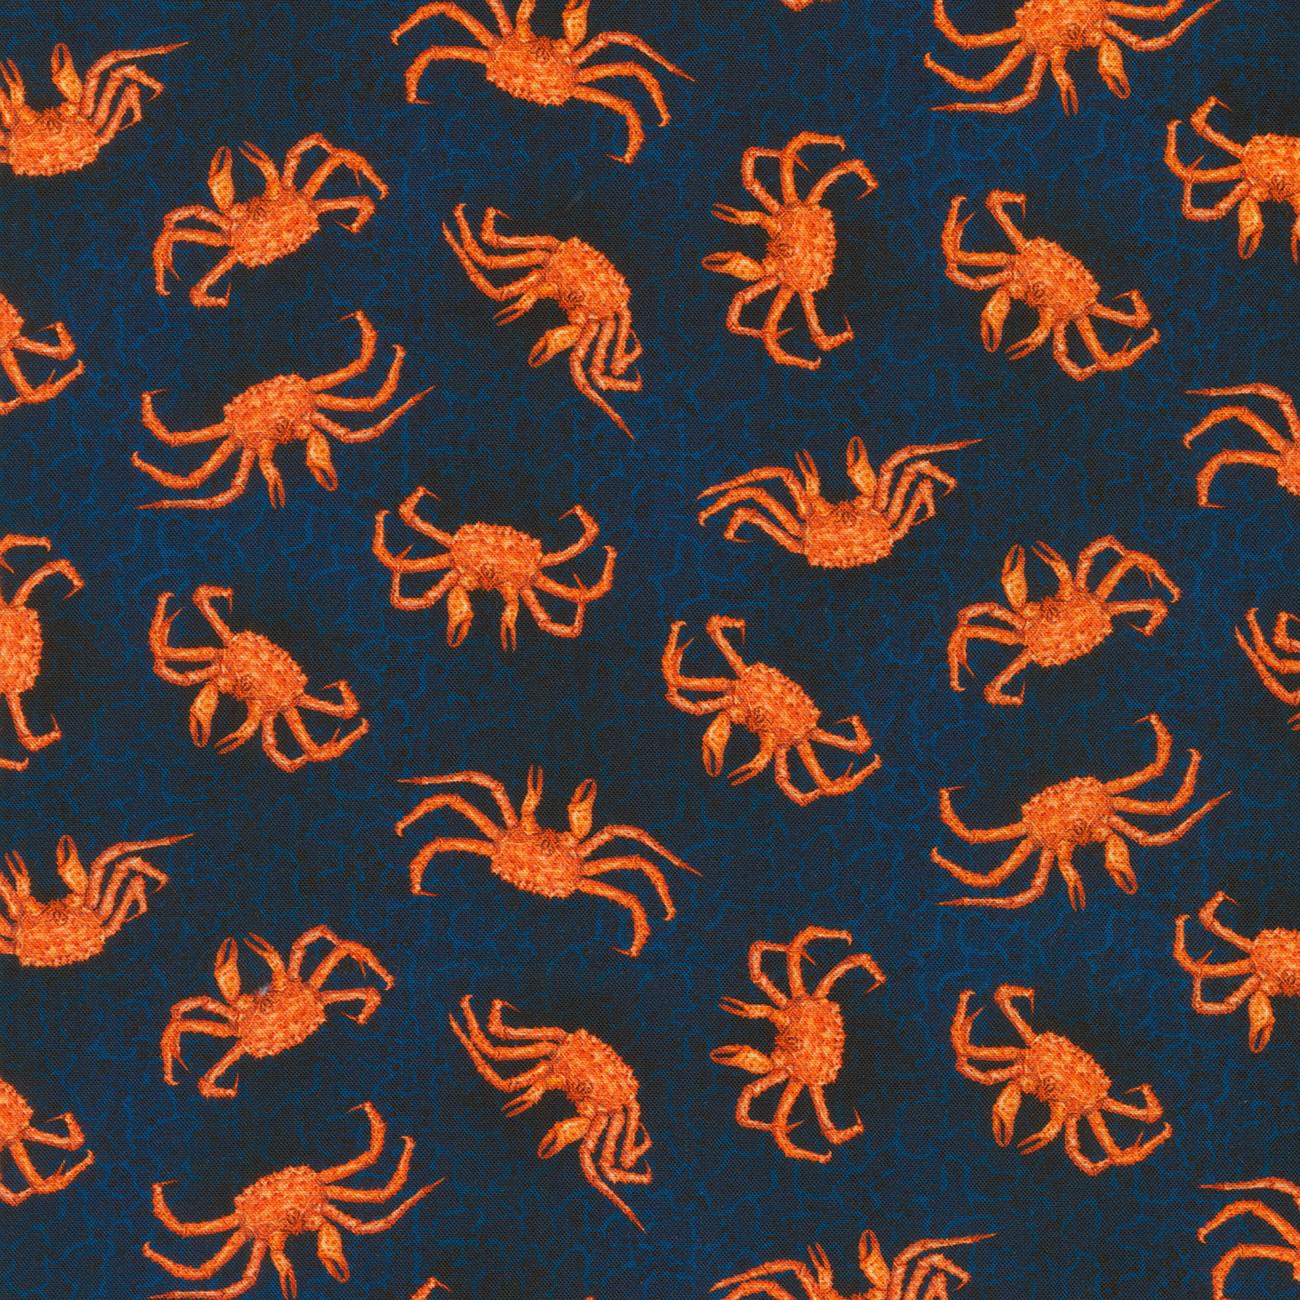 Catch of the Day Navy Crabs Fabric